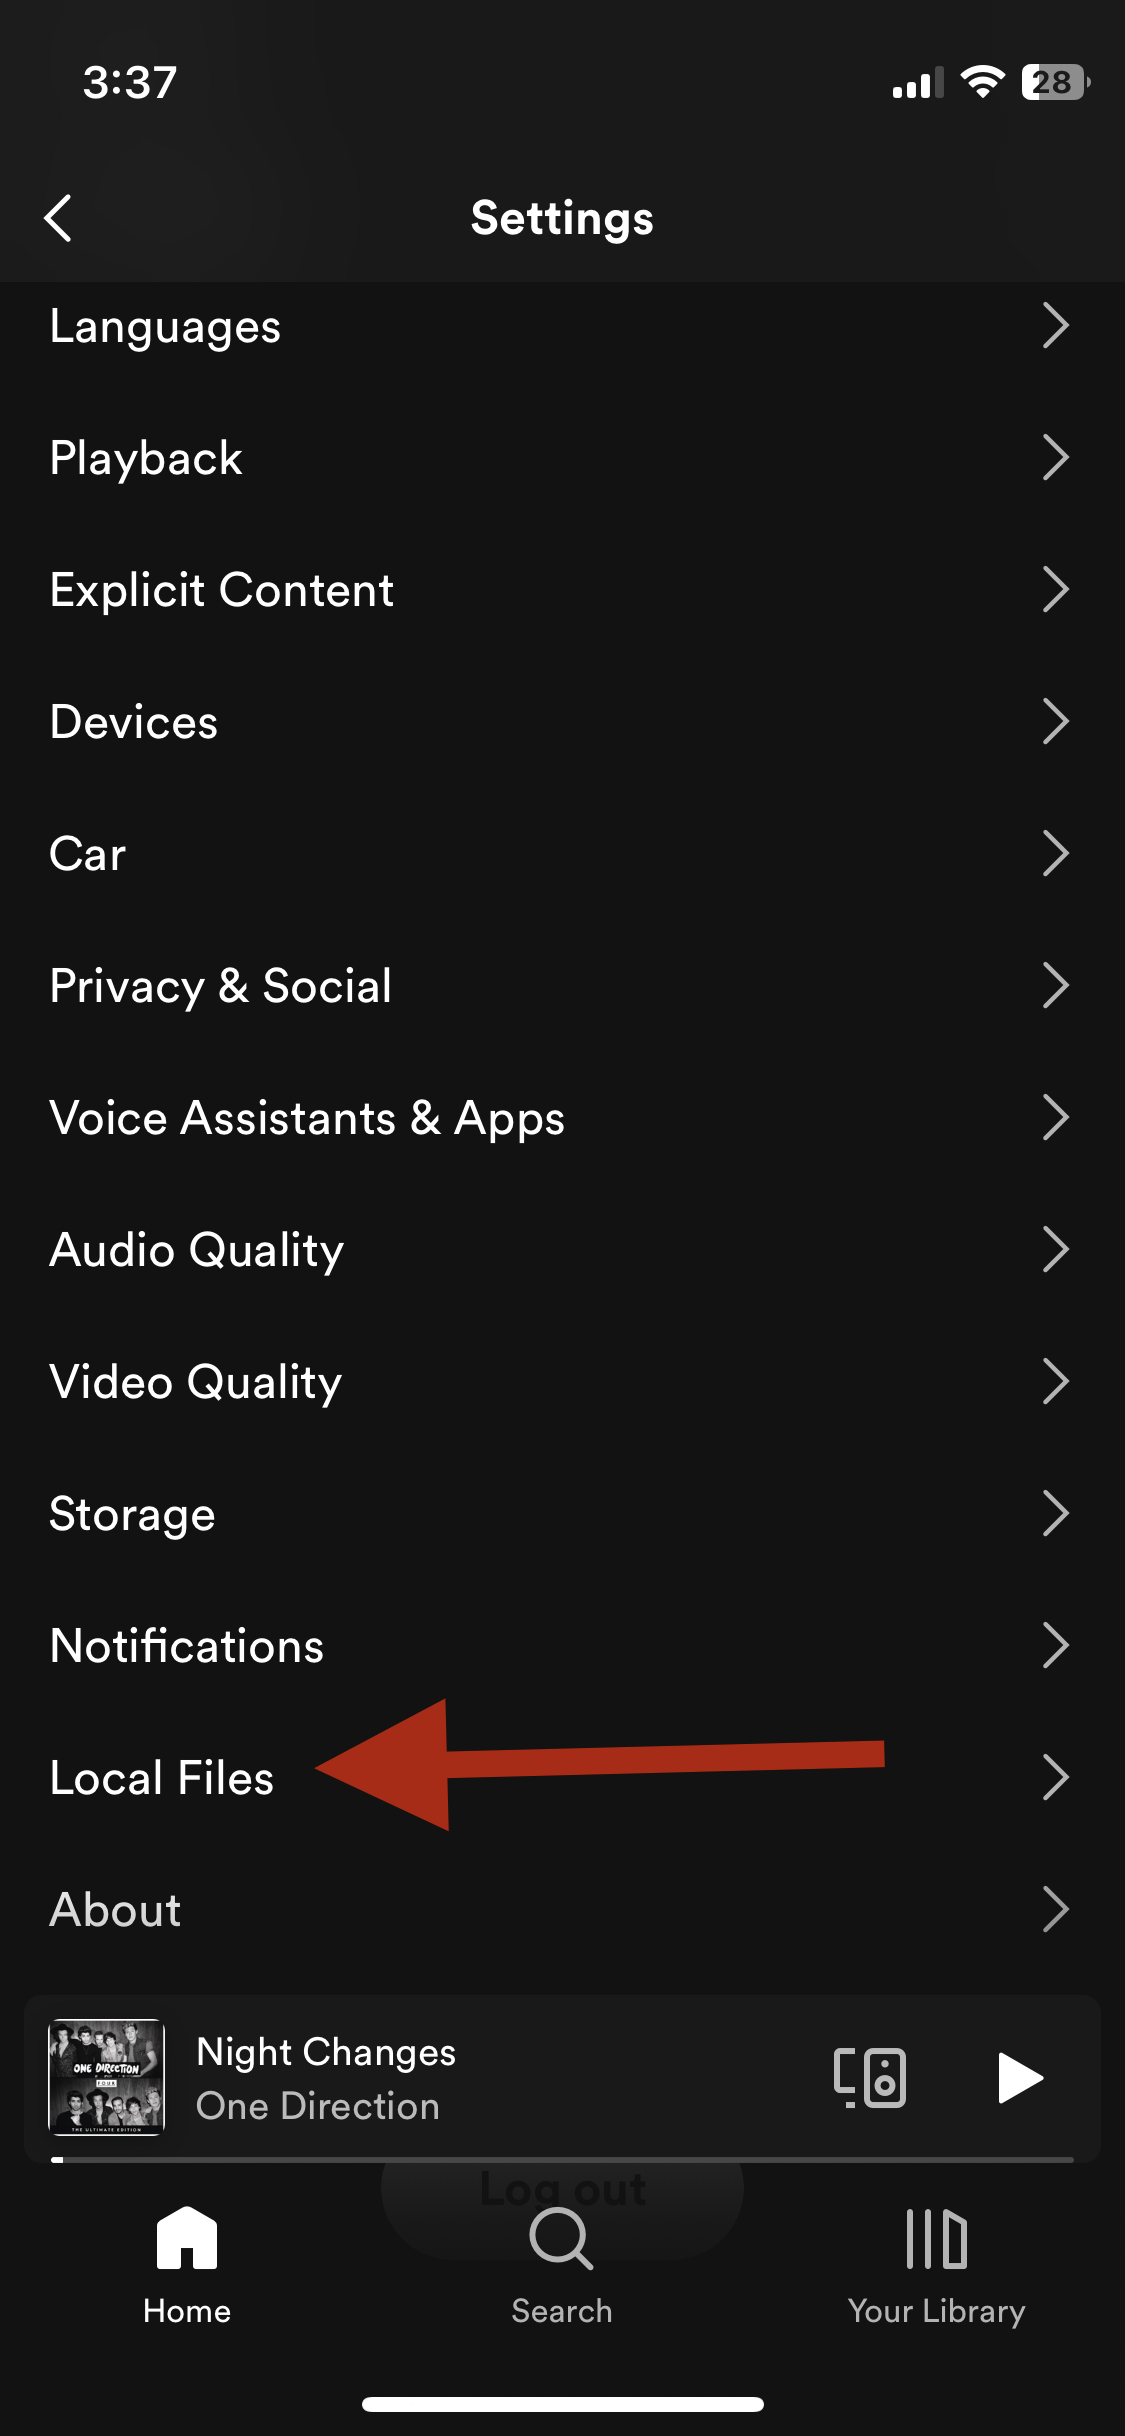 spotify local files option